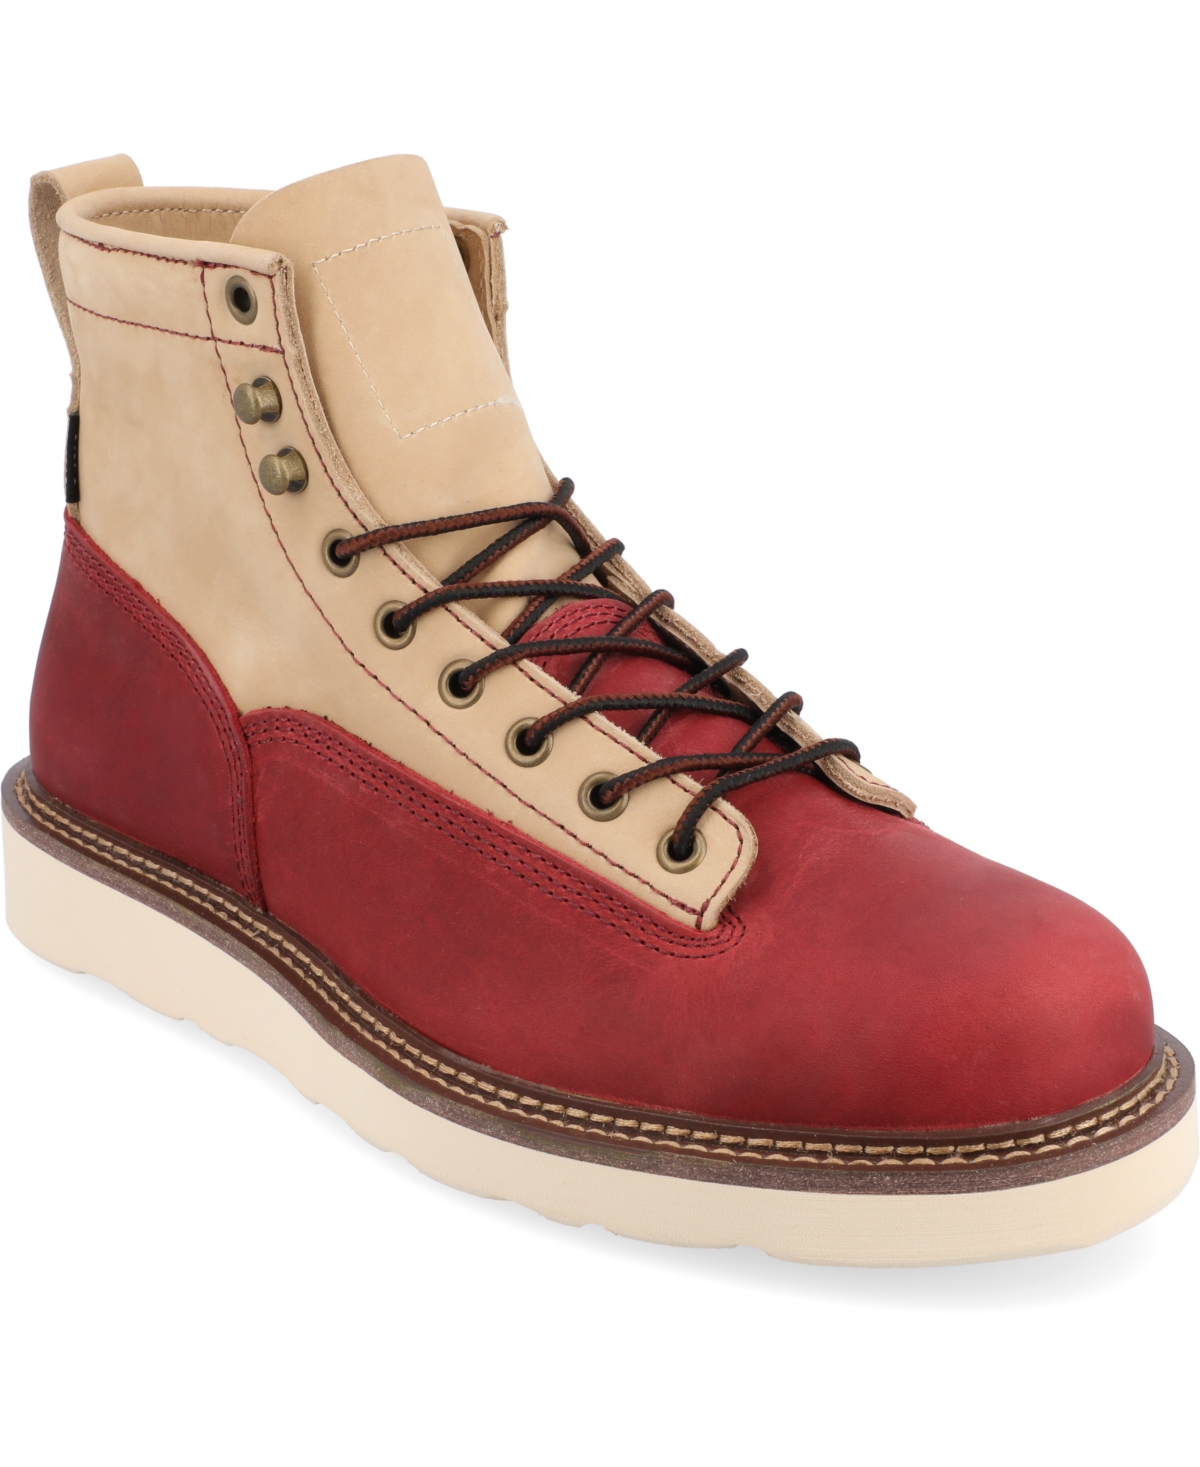 365 Men's Model 001 Lace-Up Ankle Boots - Cherry, Cream